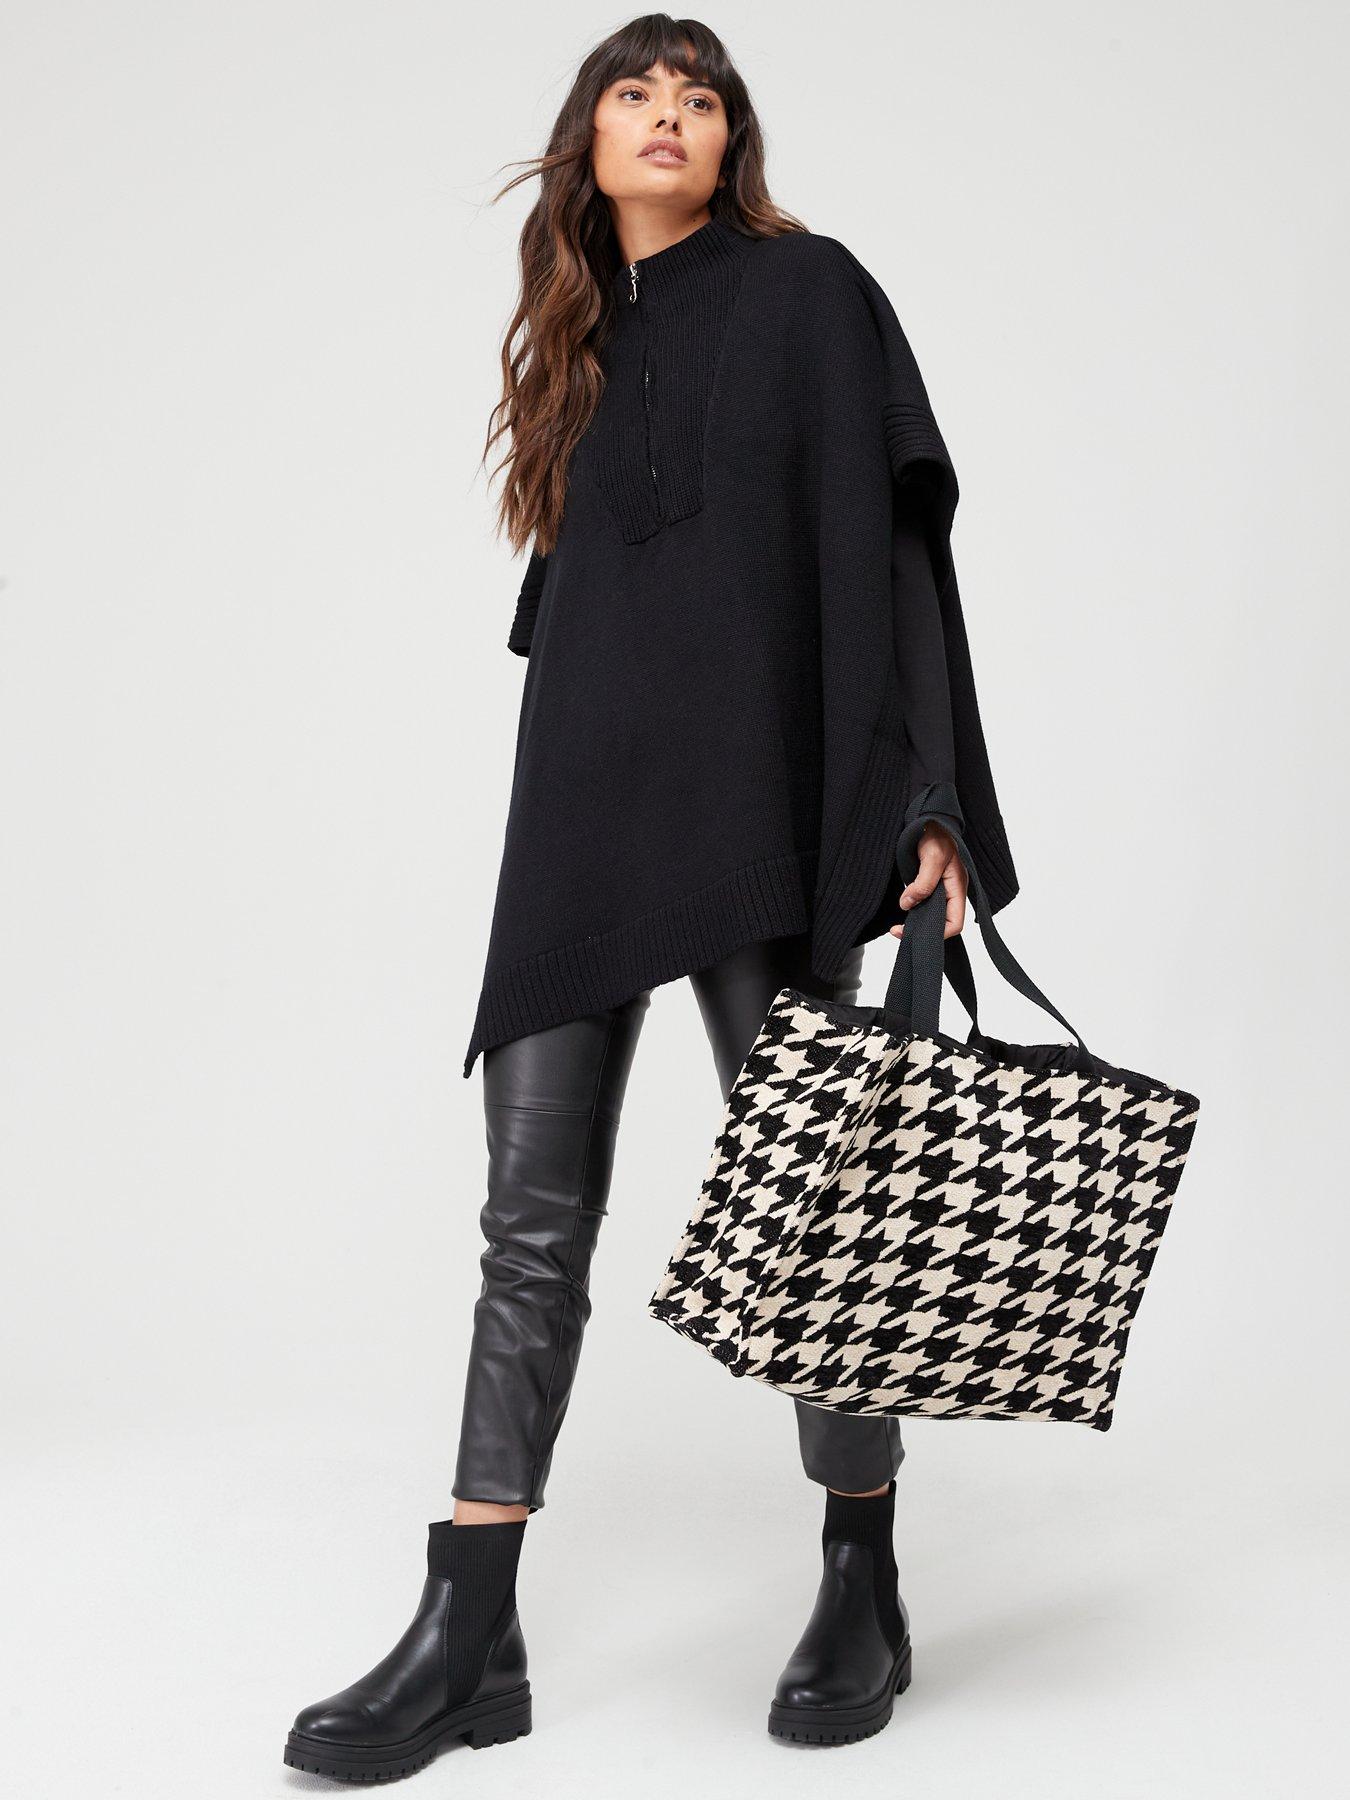 V by Very Zip Front Knitted Poncho - Black | very.co.uk